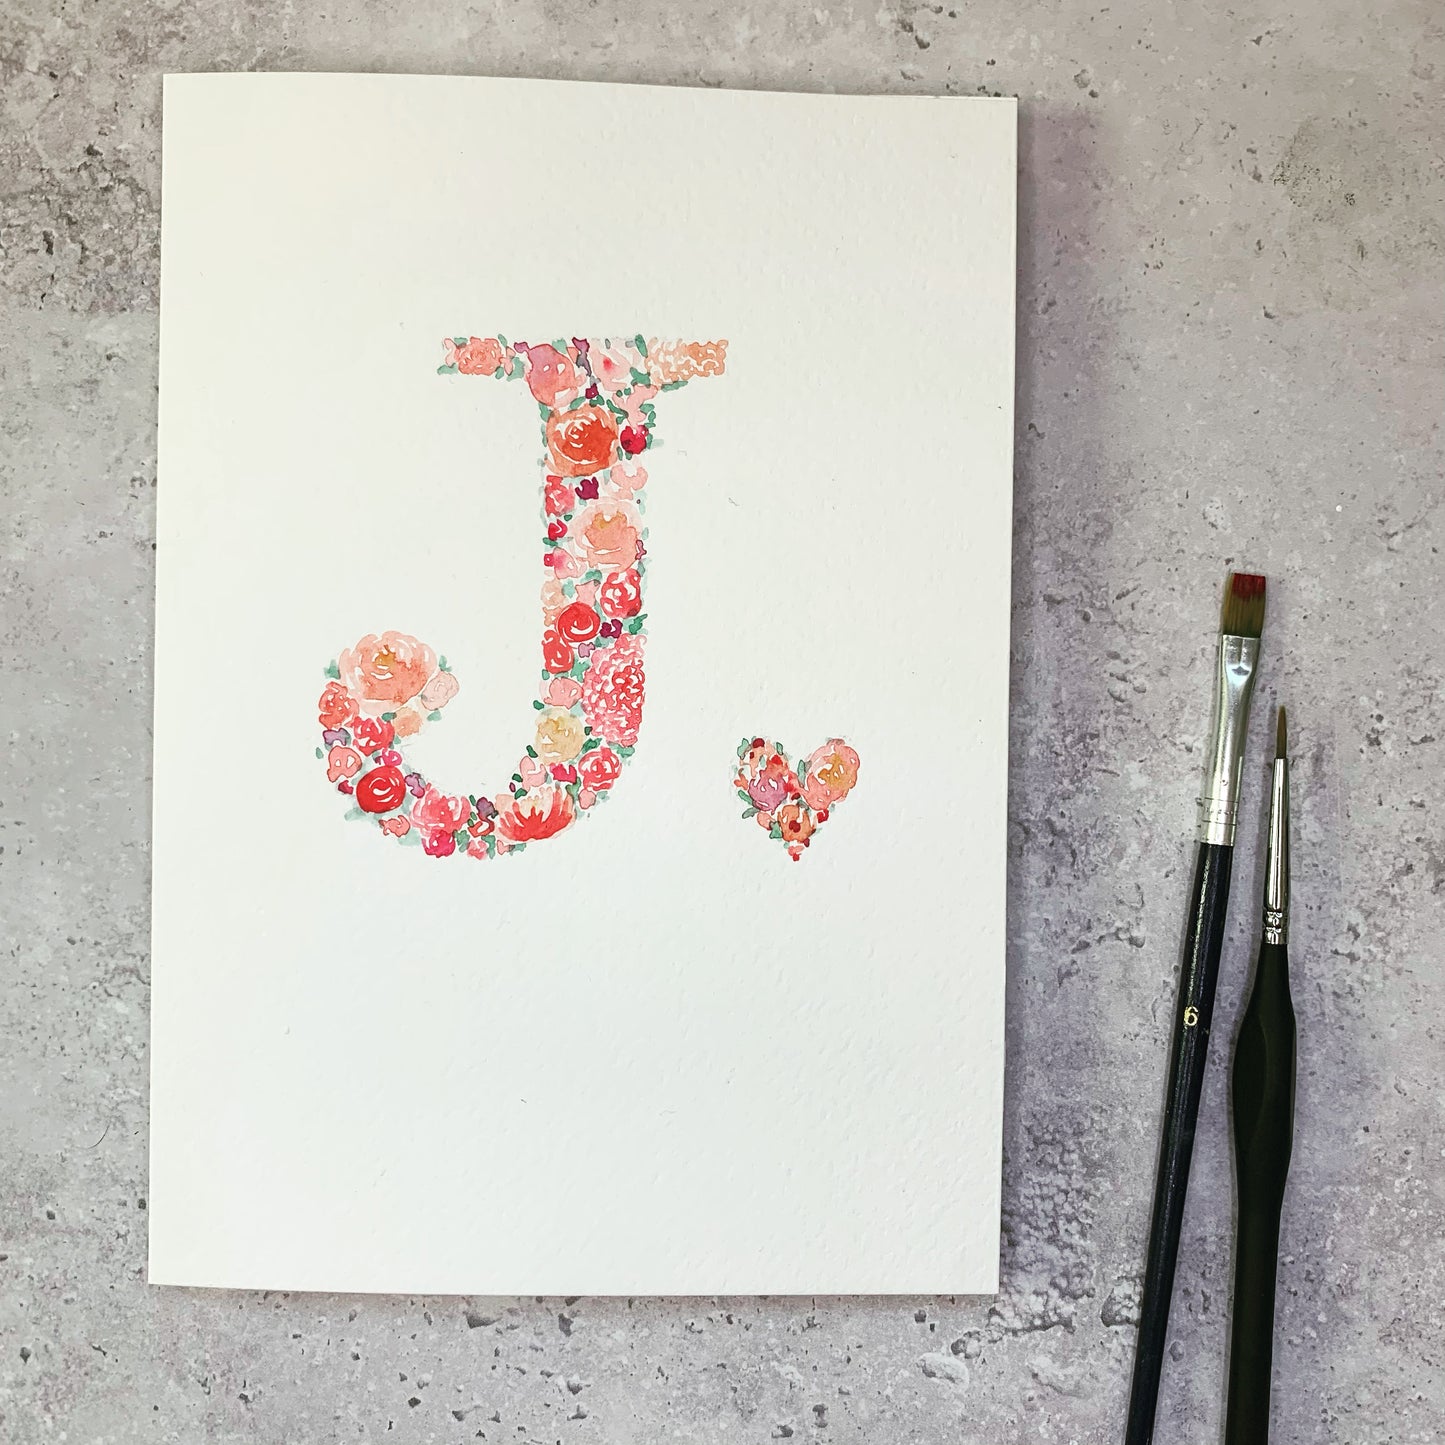 Floral initial with love heart